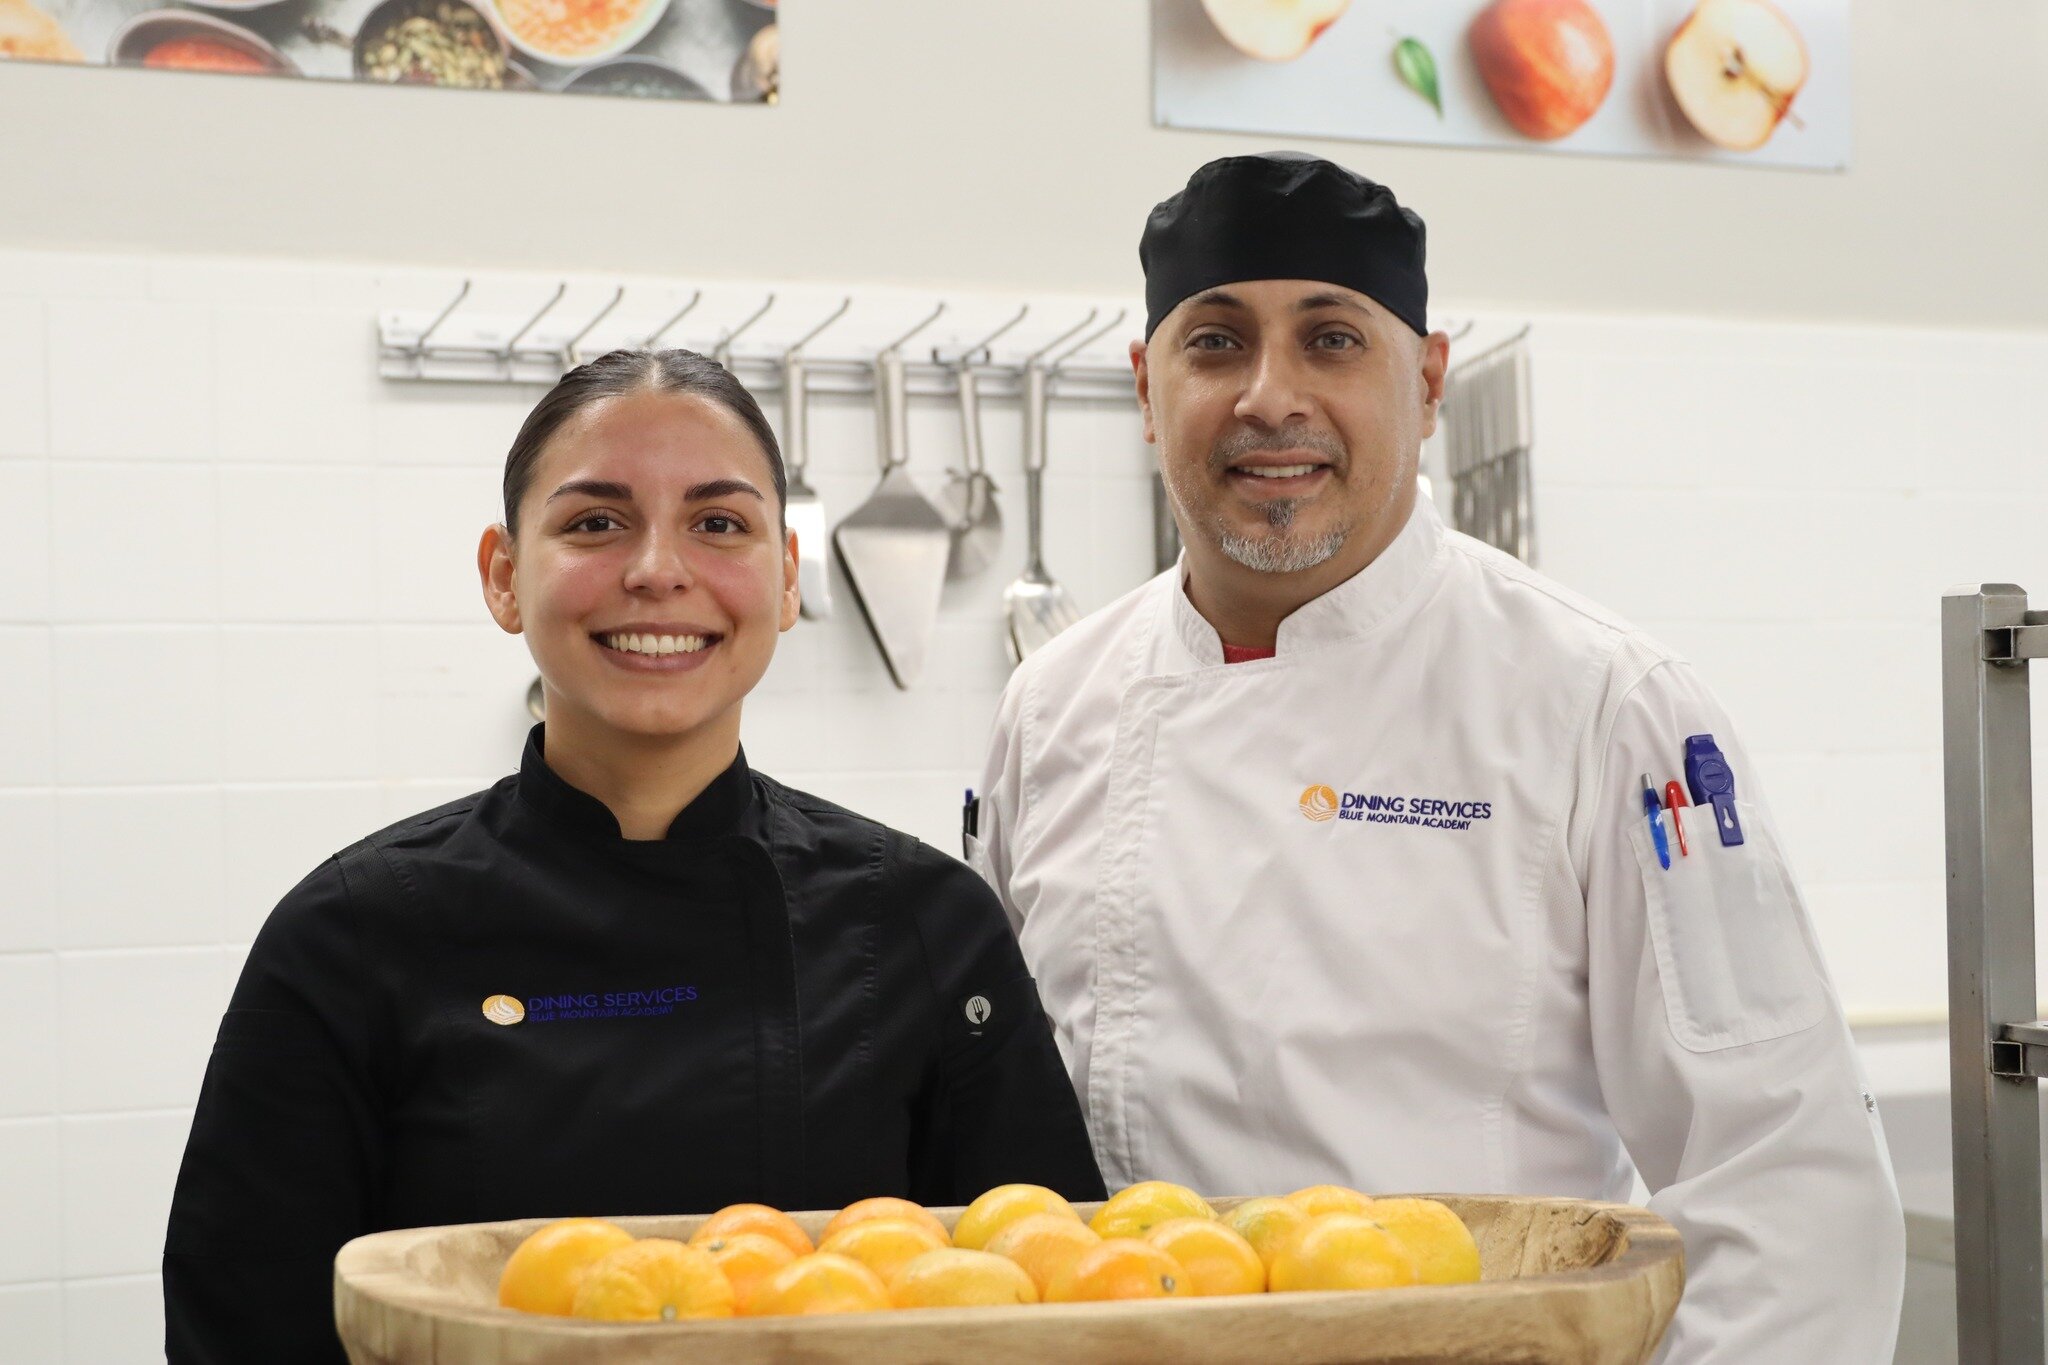 Kudos to Chef Hector Ruiz and our exceptional cafeteria team for securing a perfect 100% score on the state health inspection &ndash; no deficiencies detected! 🍽👨&zwj;🍳🍲

In the first picture, Nutritionist Mariana Quiroga Chef Manager, stands on 